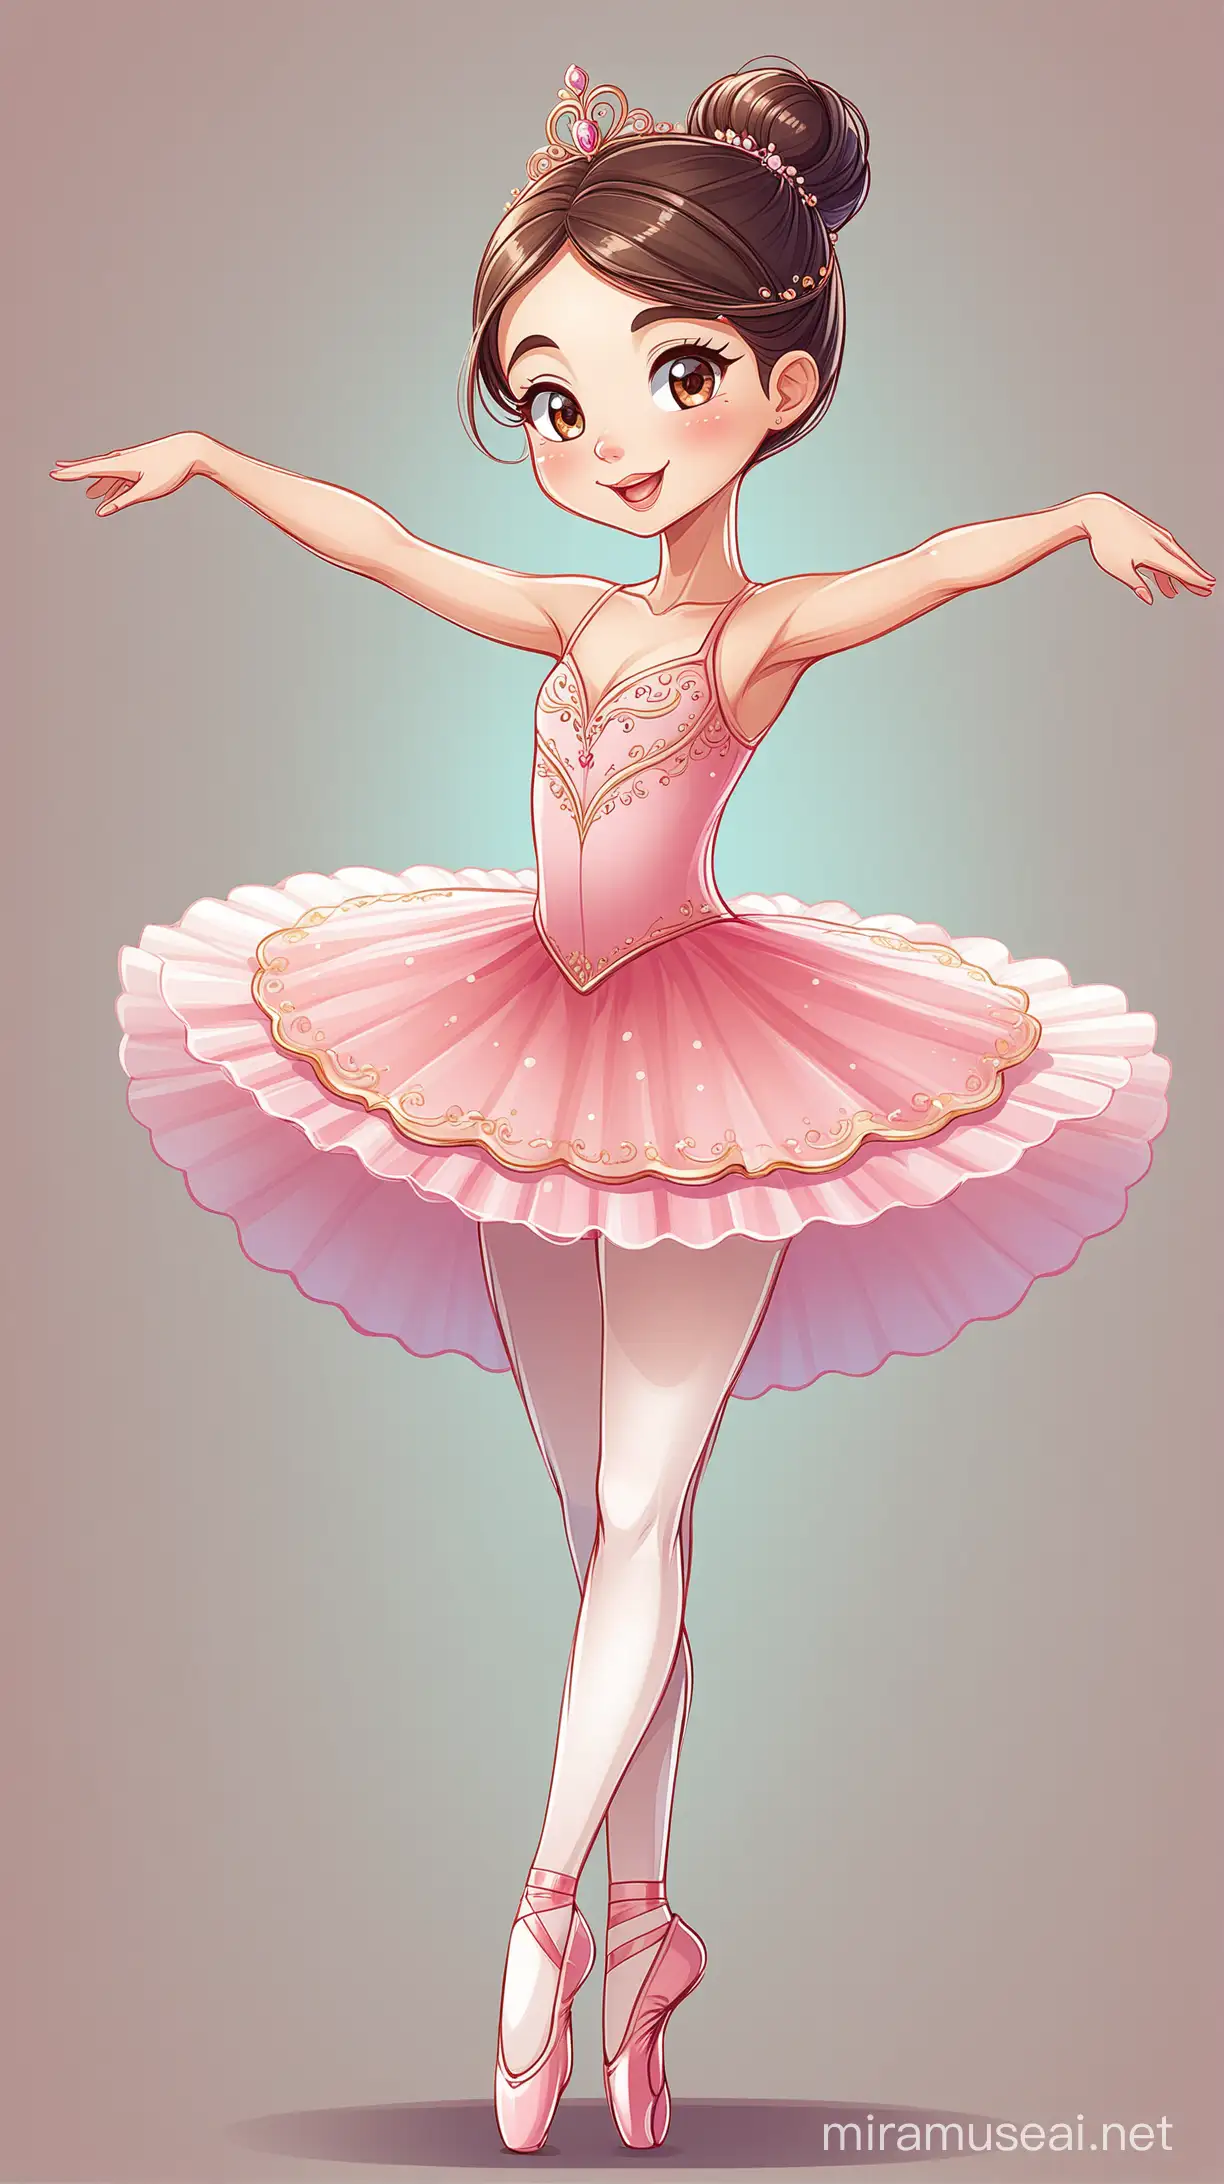 Cheerful Cartoon Ballet Dancer Performing with Humor